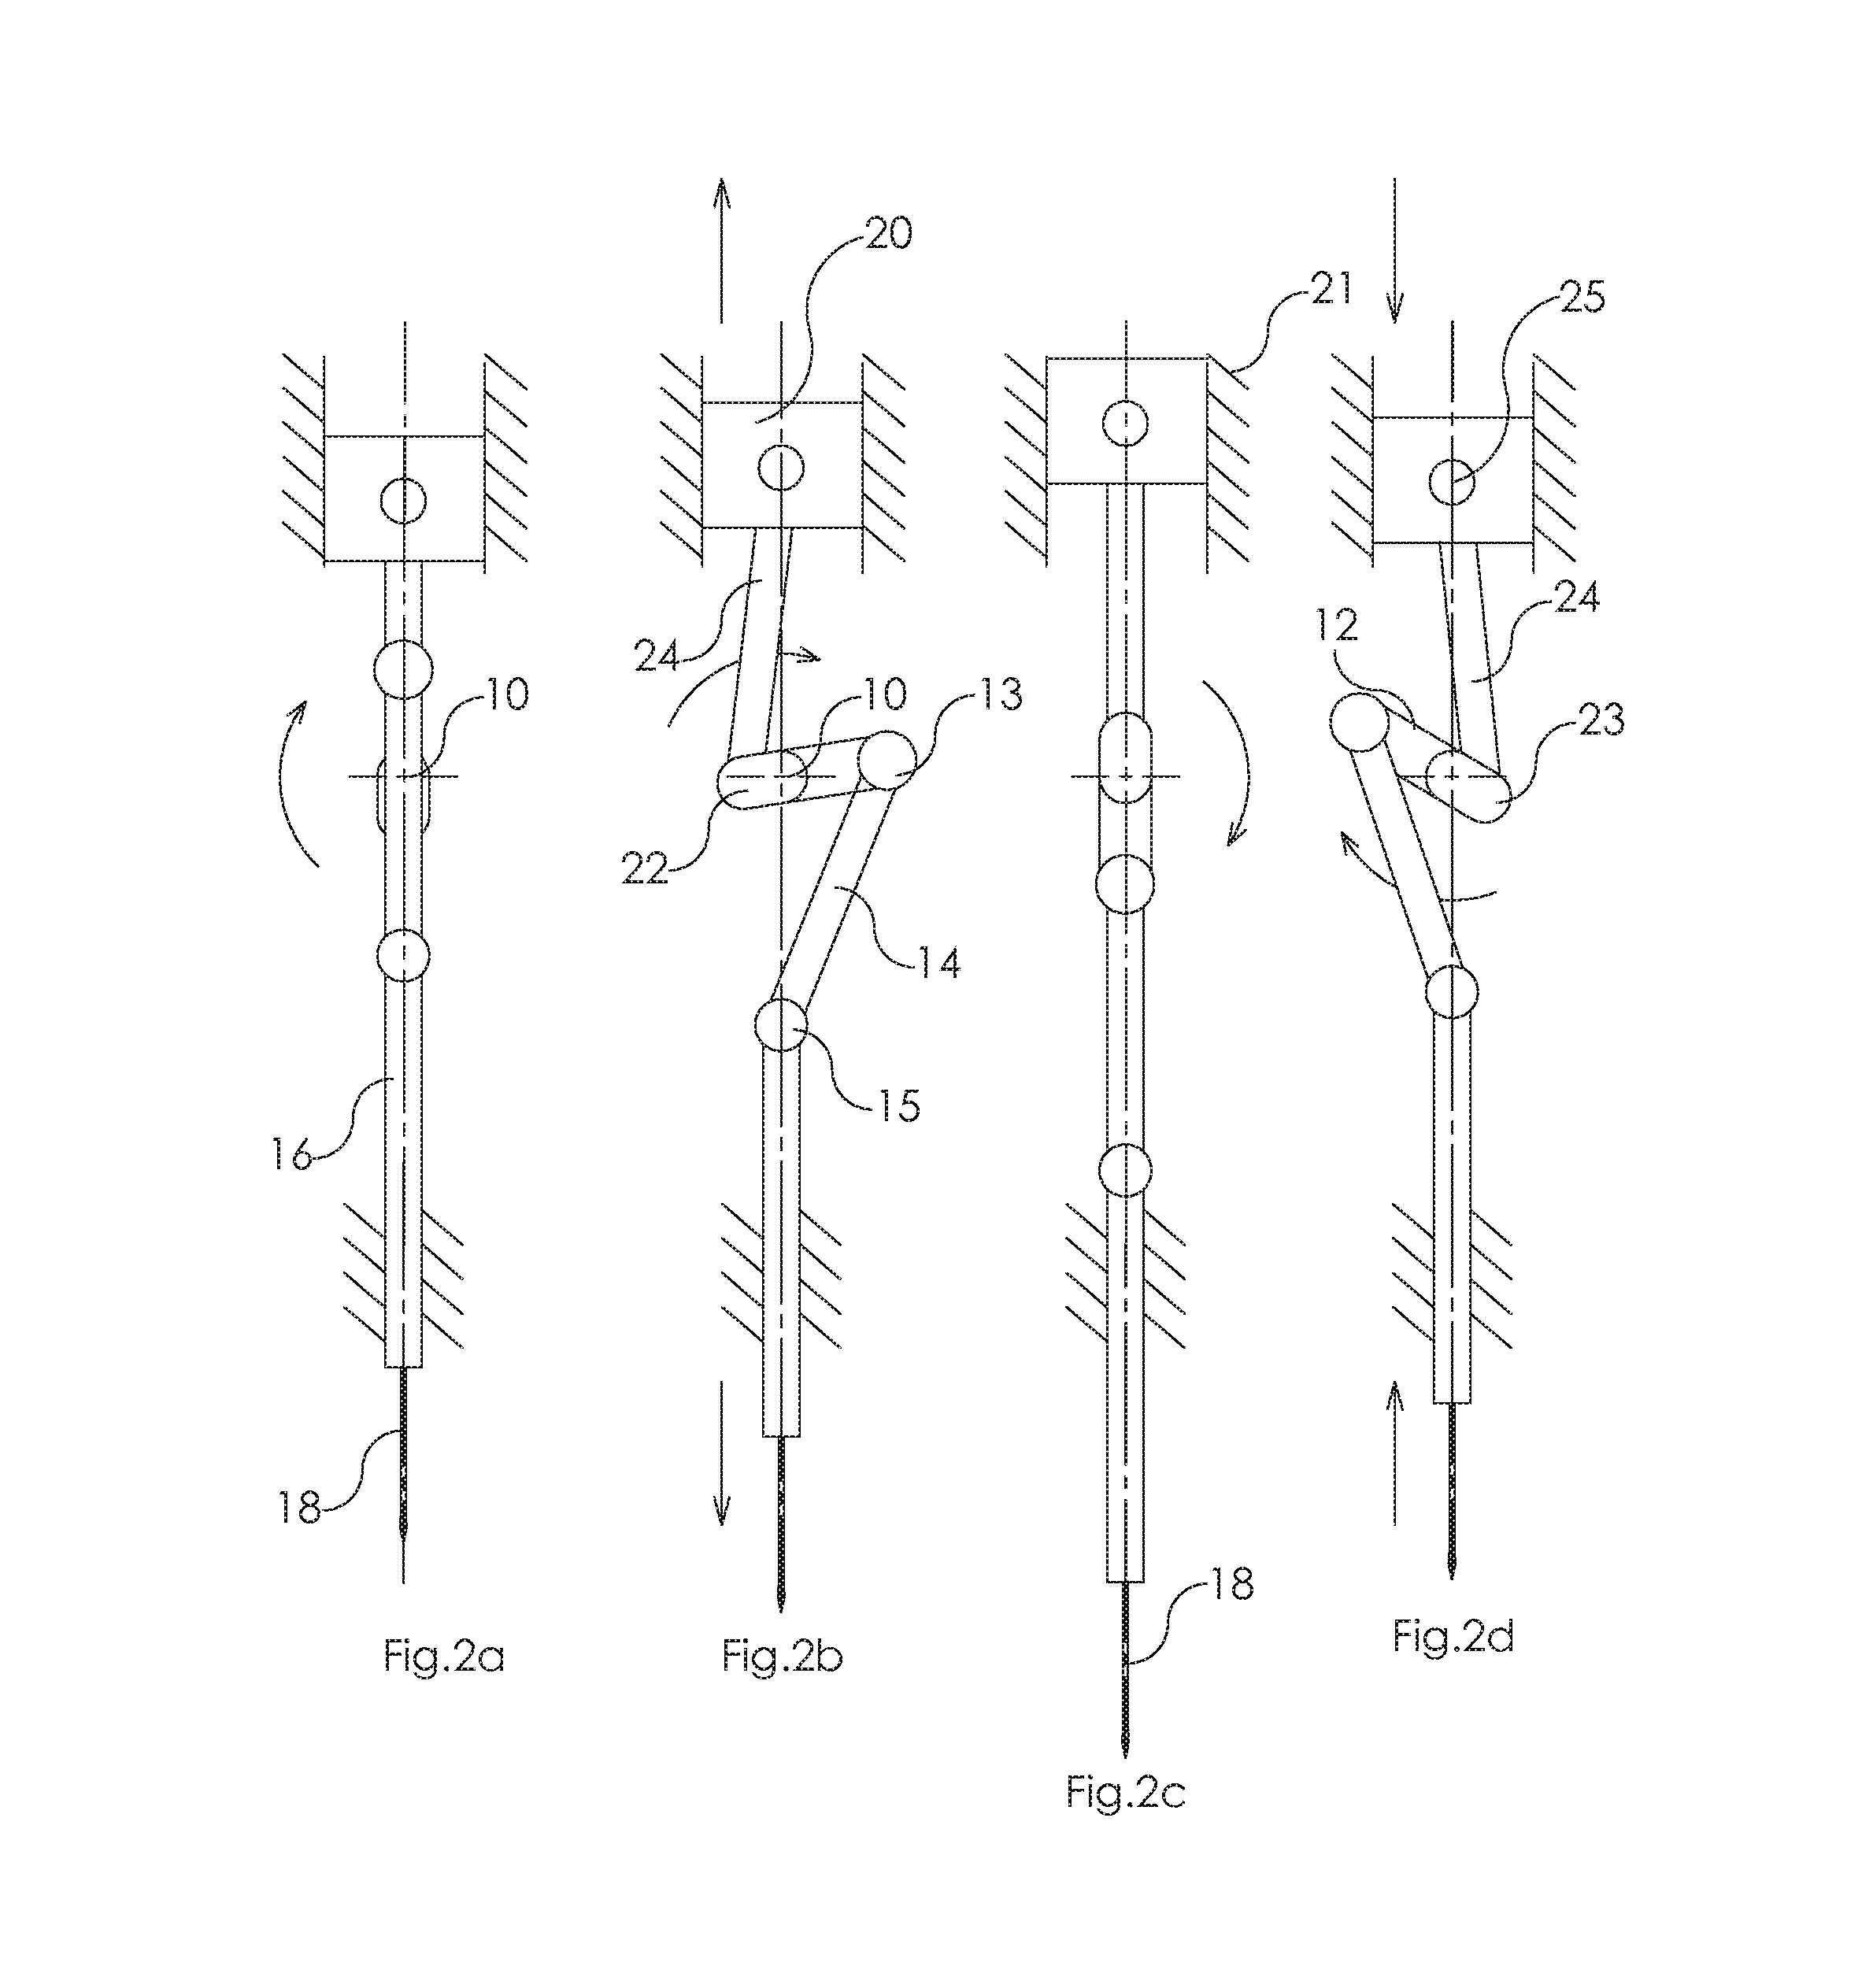 Needle bar driving system for sewing machines